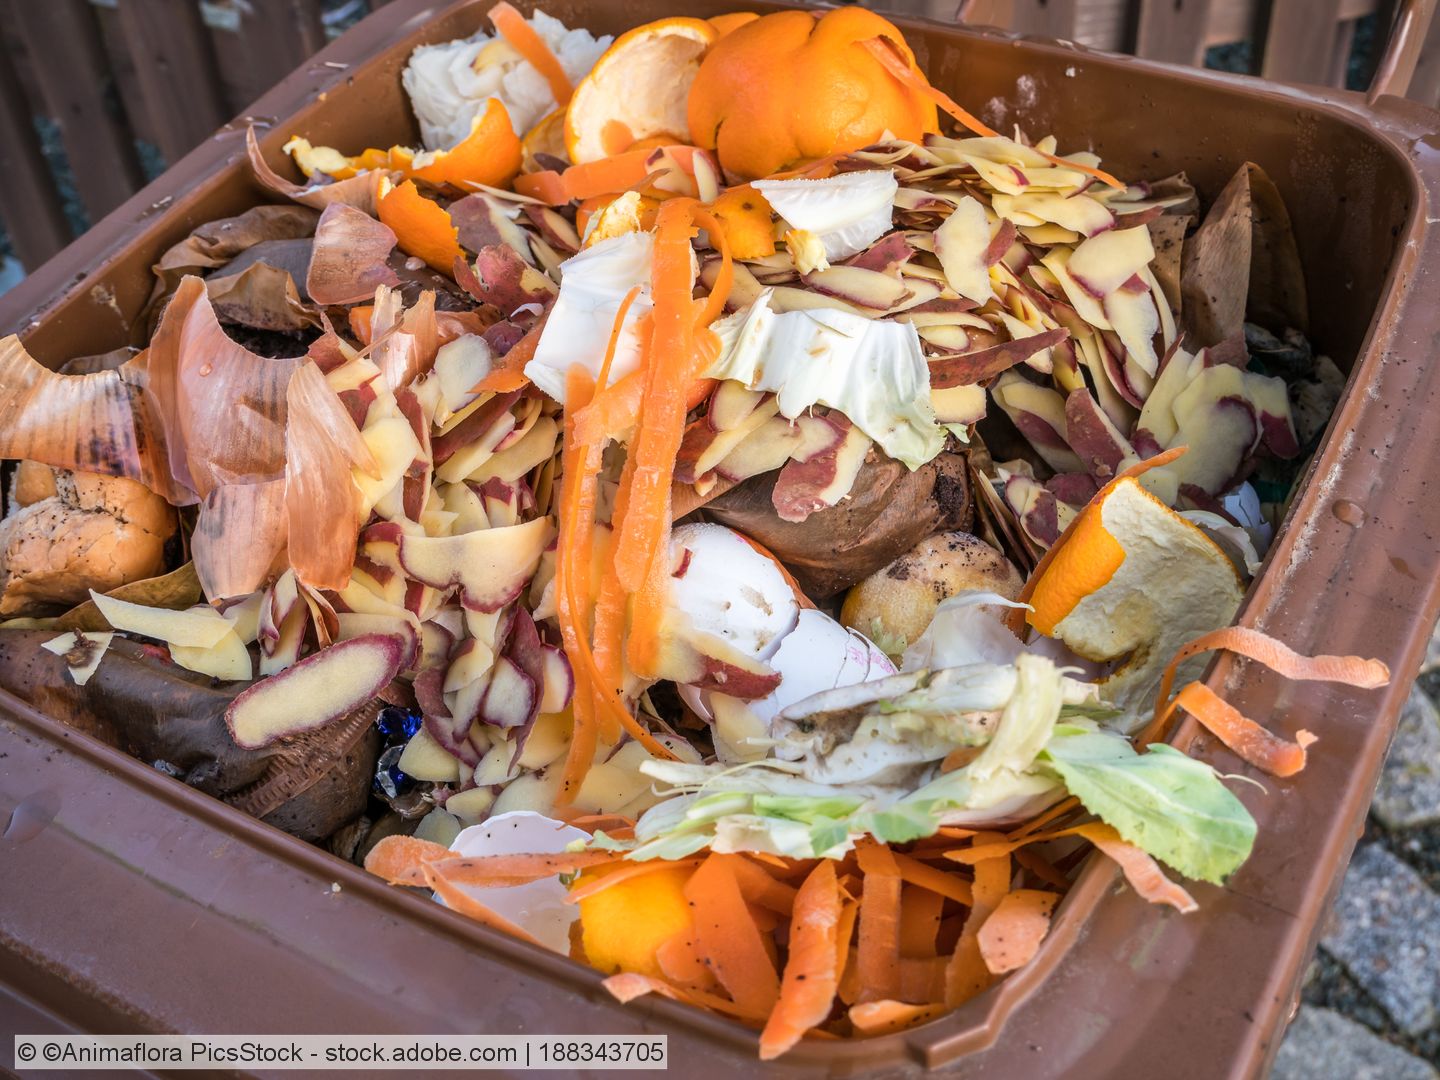 Open bin with seperately collected kitchen waste